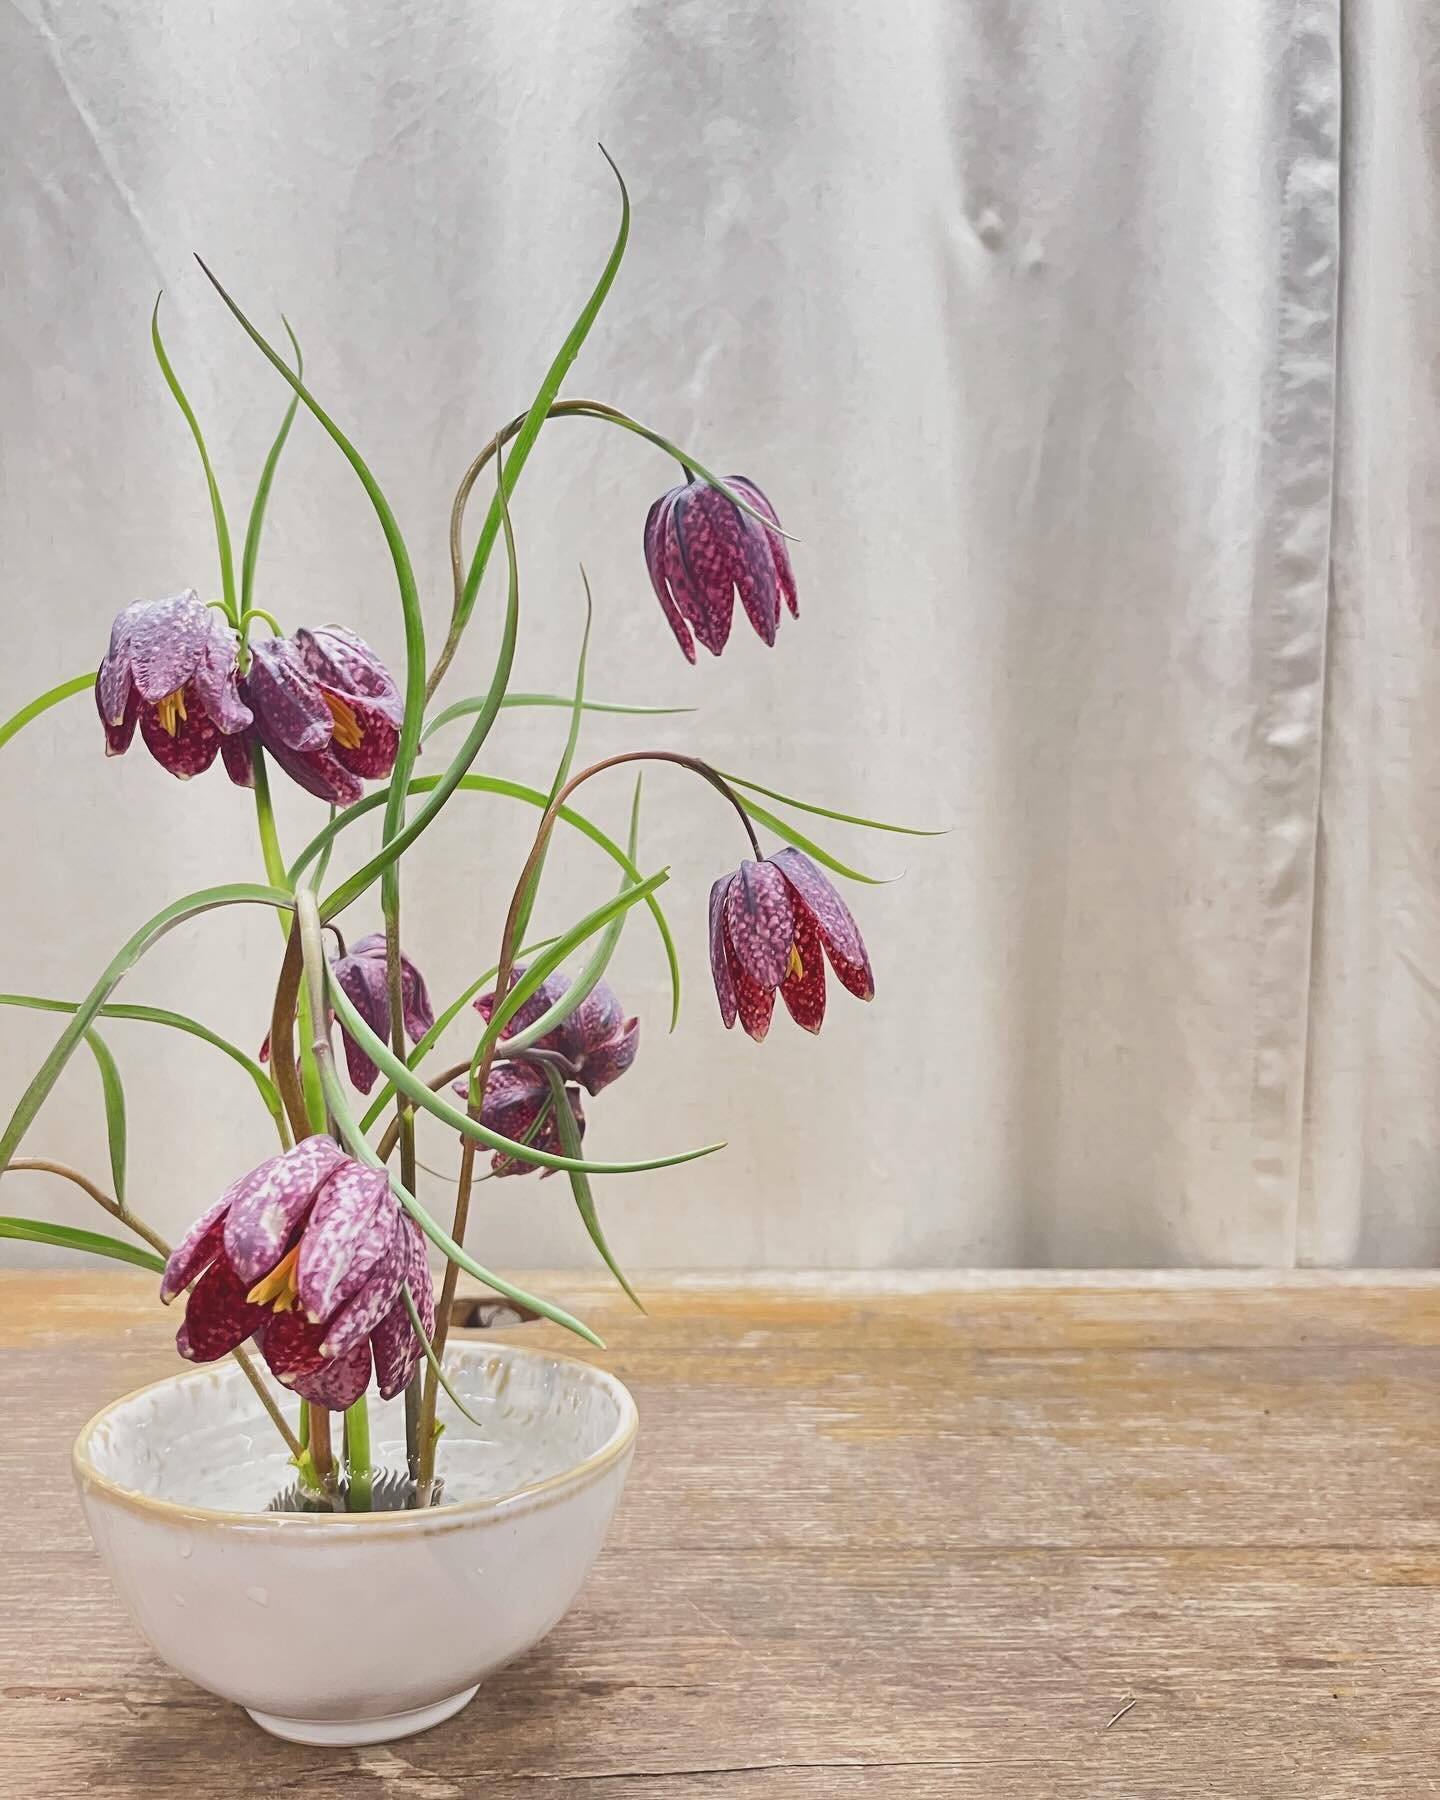 Fritillaria meleagris always feels special to see in person.
From @foxfarmflowersofmaine via @maineflowercollective.
Designed by @flowerbee_sinead.